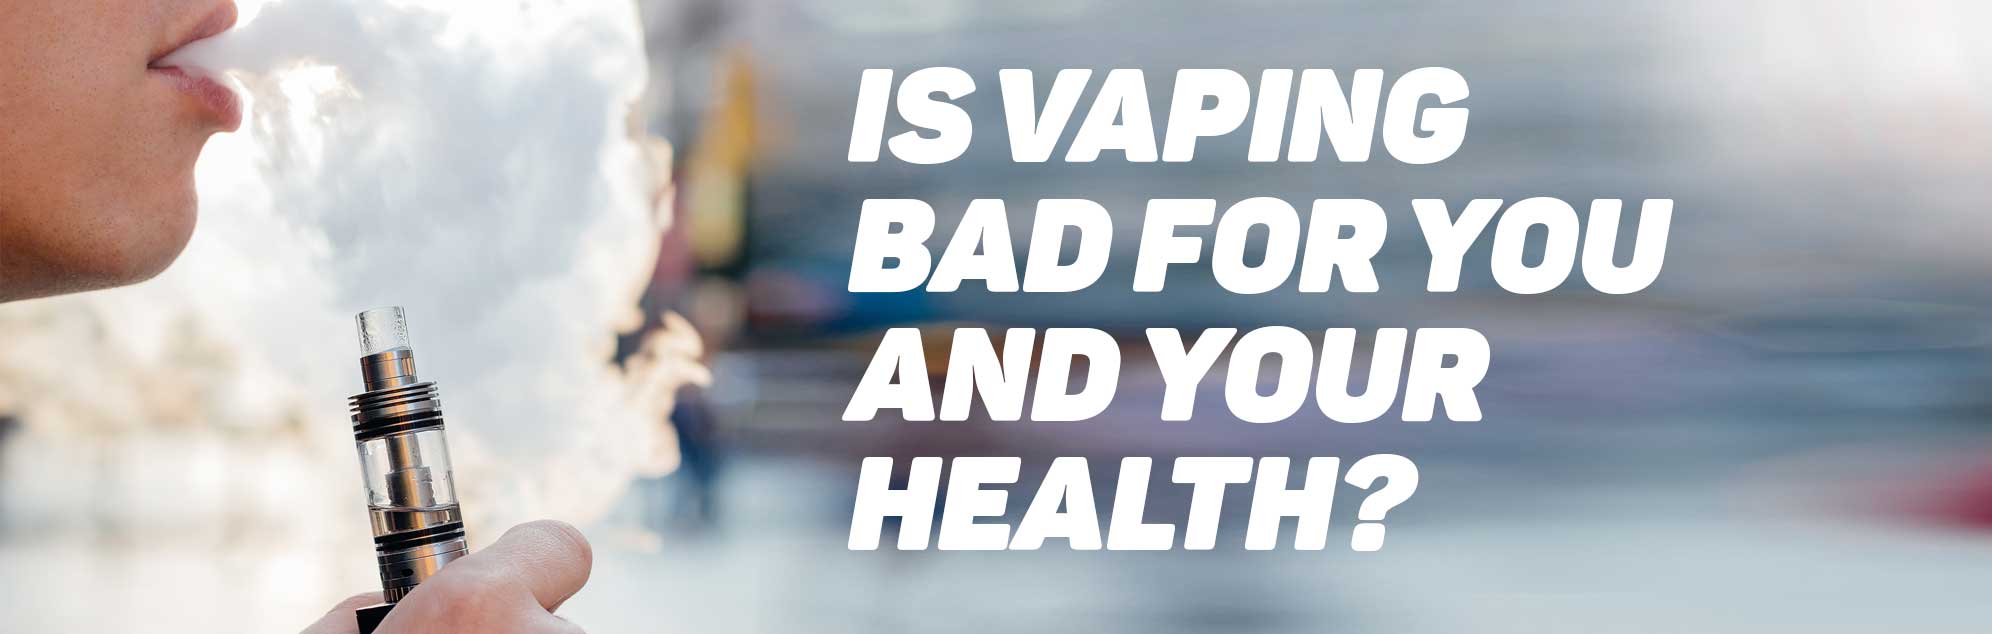 Is Vaping Bad For Your Teeth? Here’s What You Should Know About Teeth Veneers Manchester Too